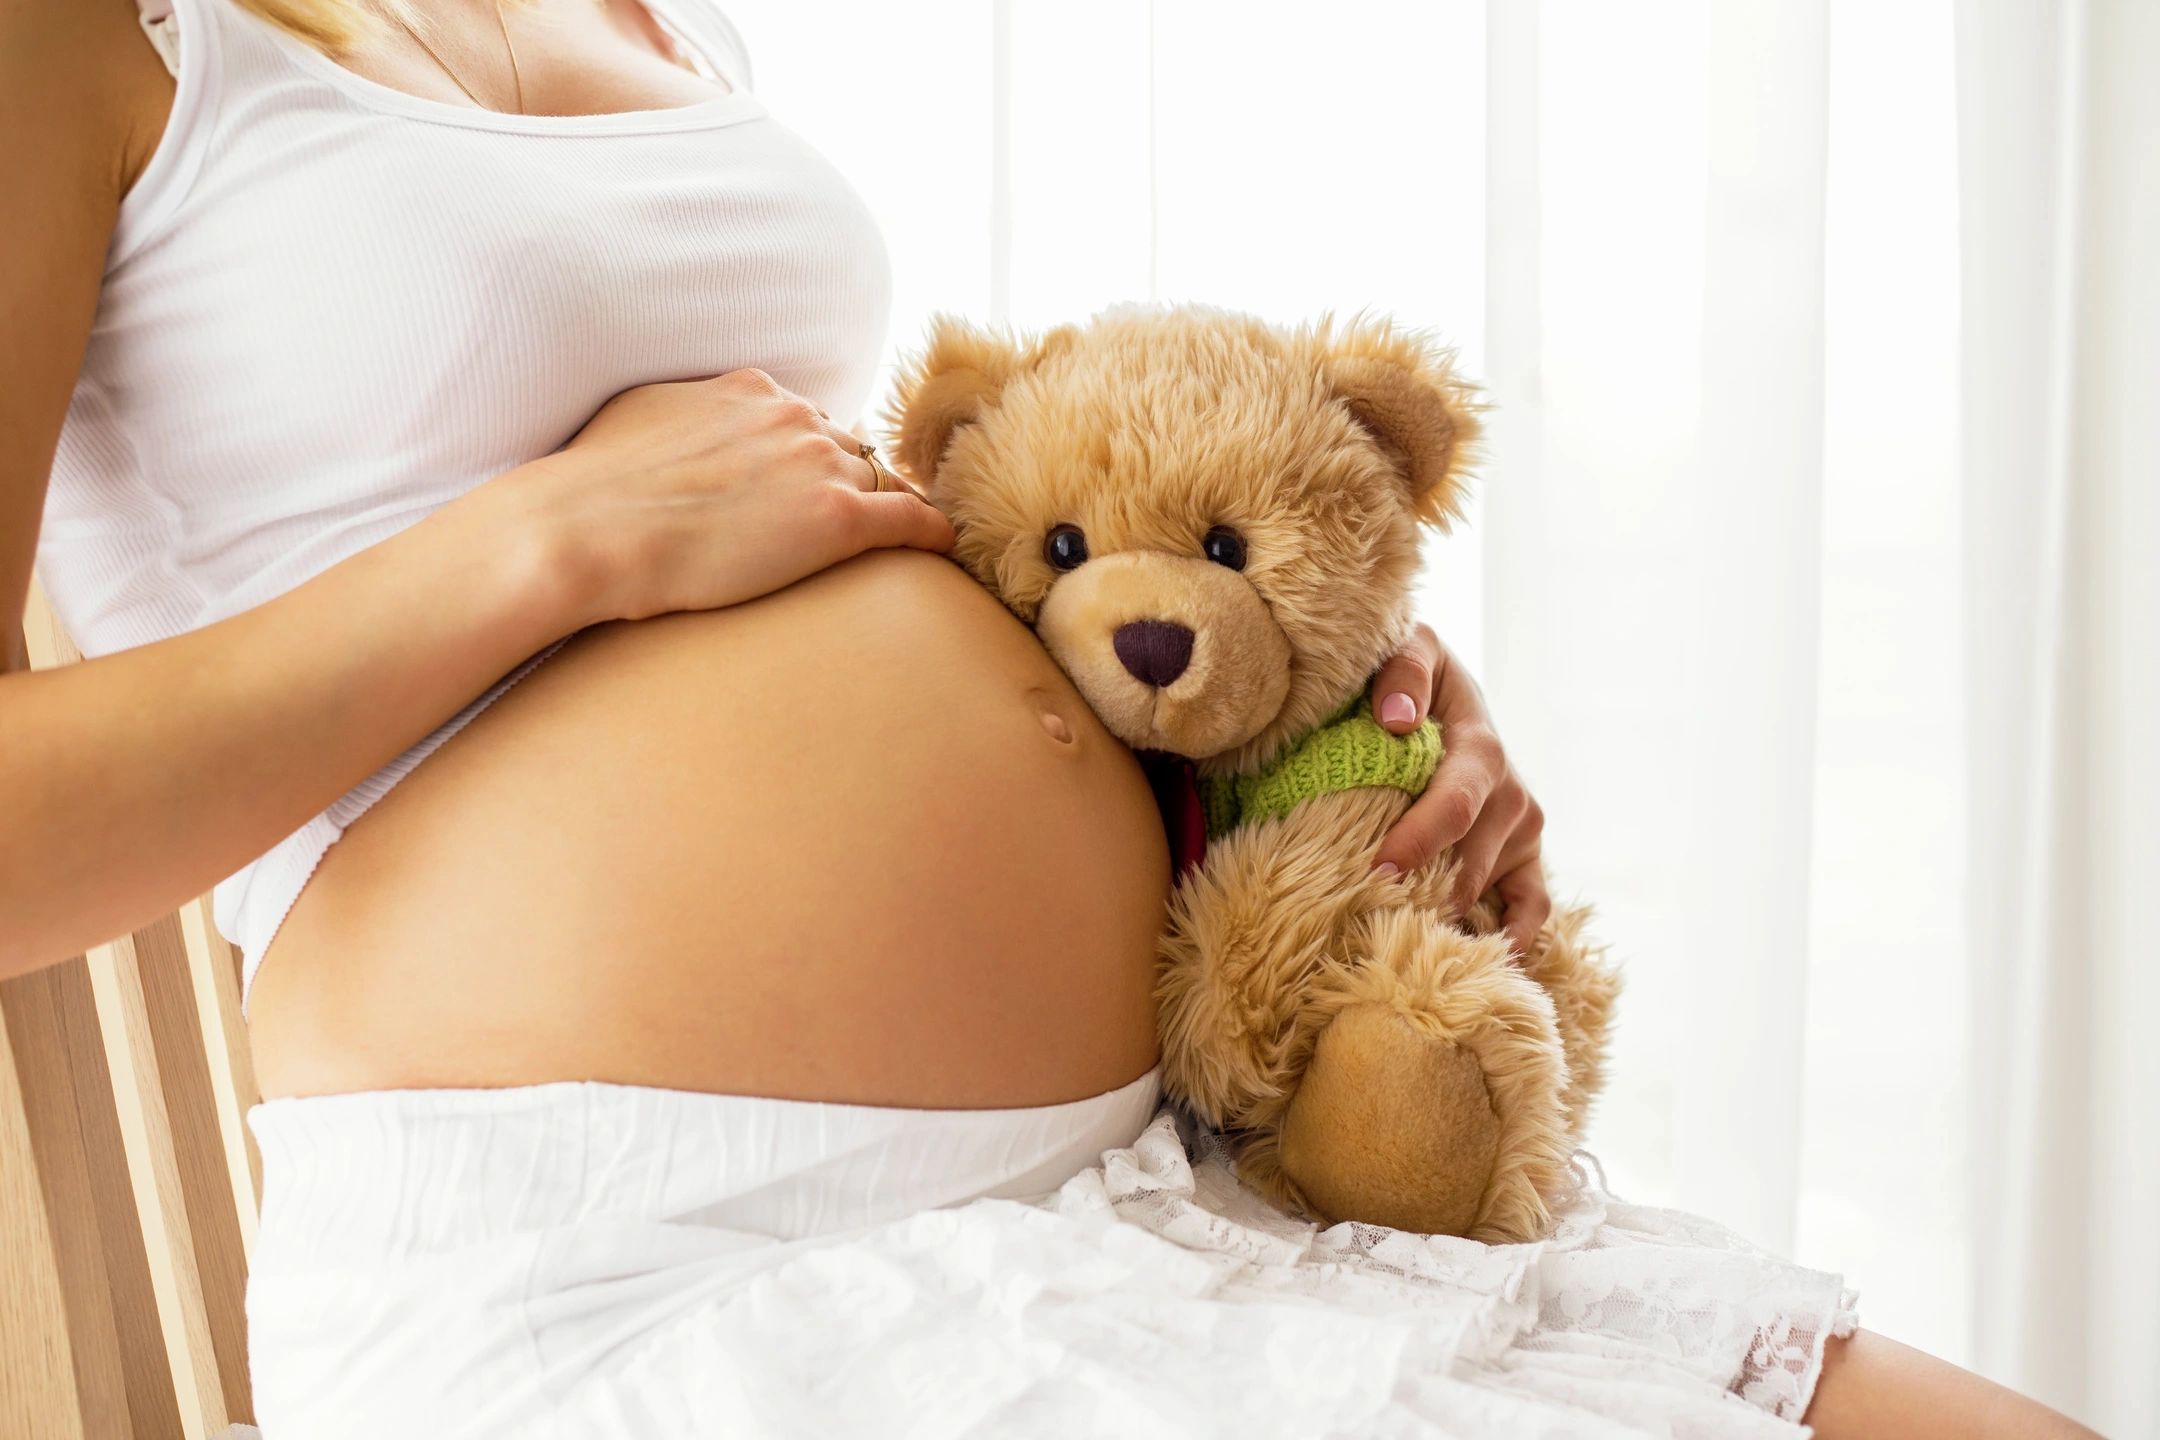 DR. John R. A woman holding a teddy bear up to her stomach